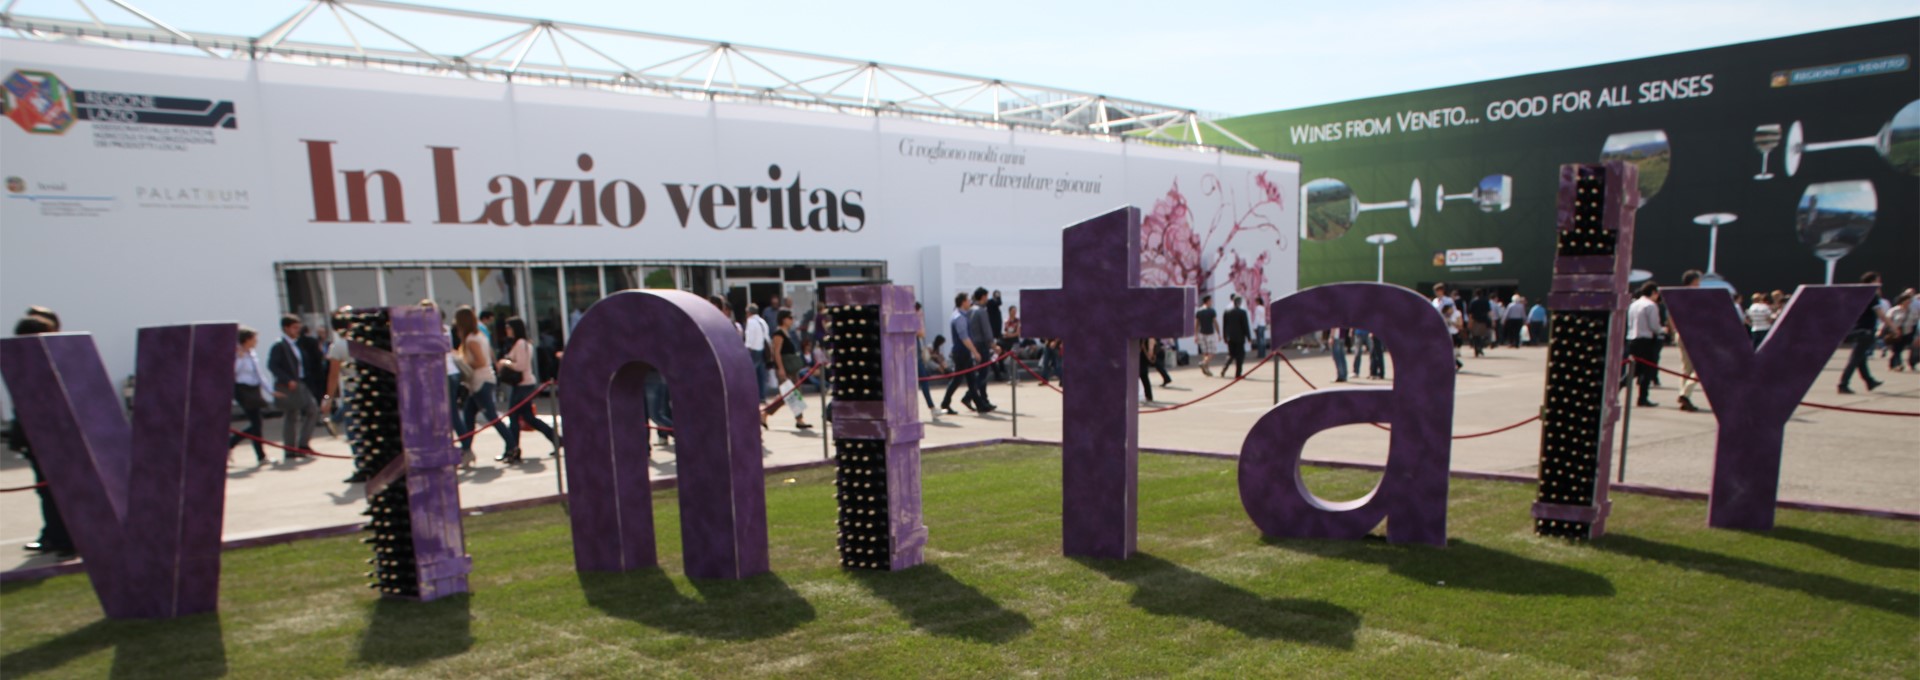 17-facts-about-vinitaly-wine-exhibition